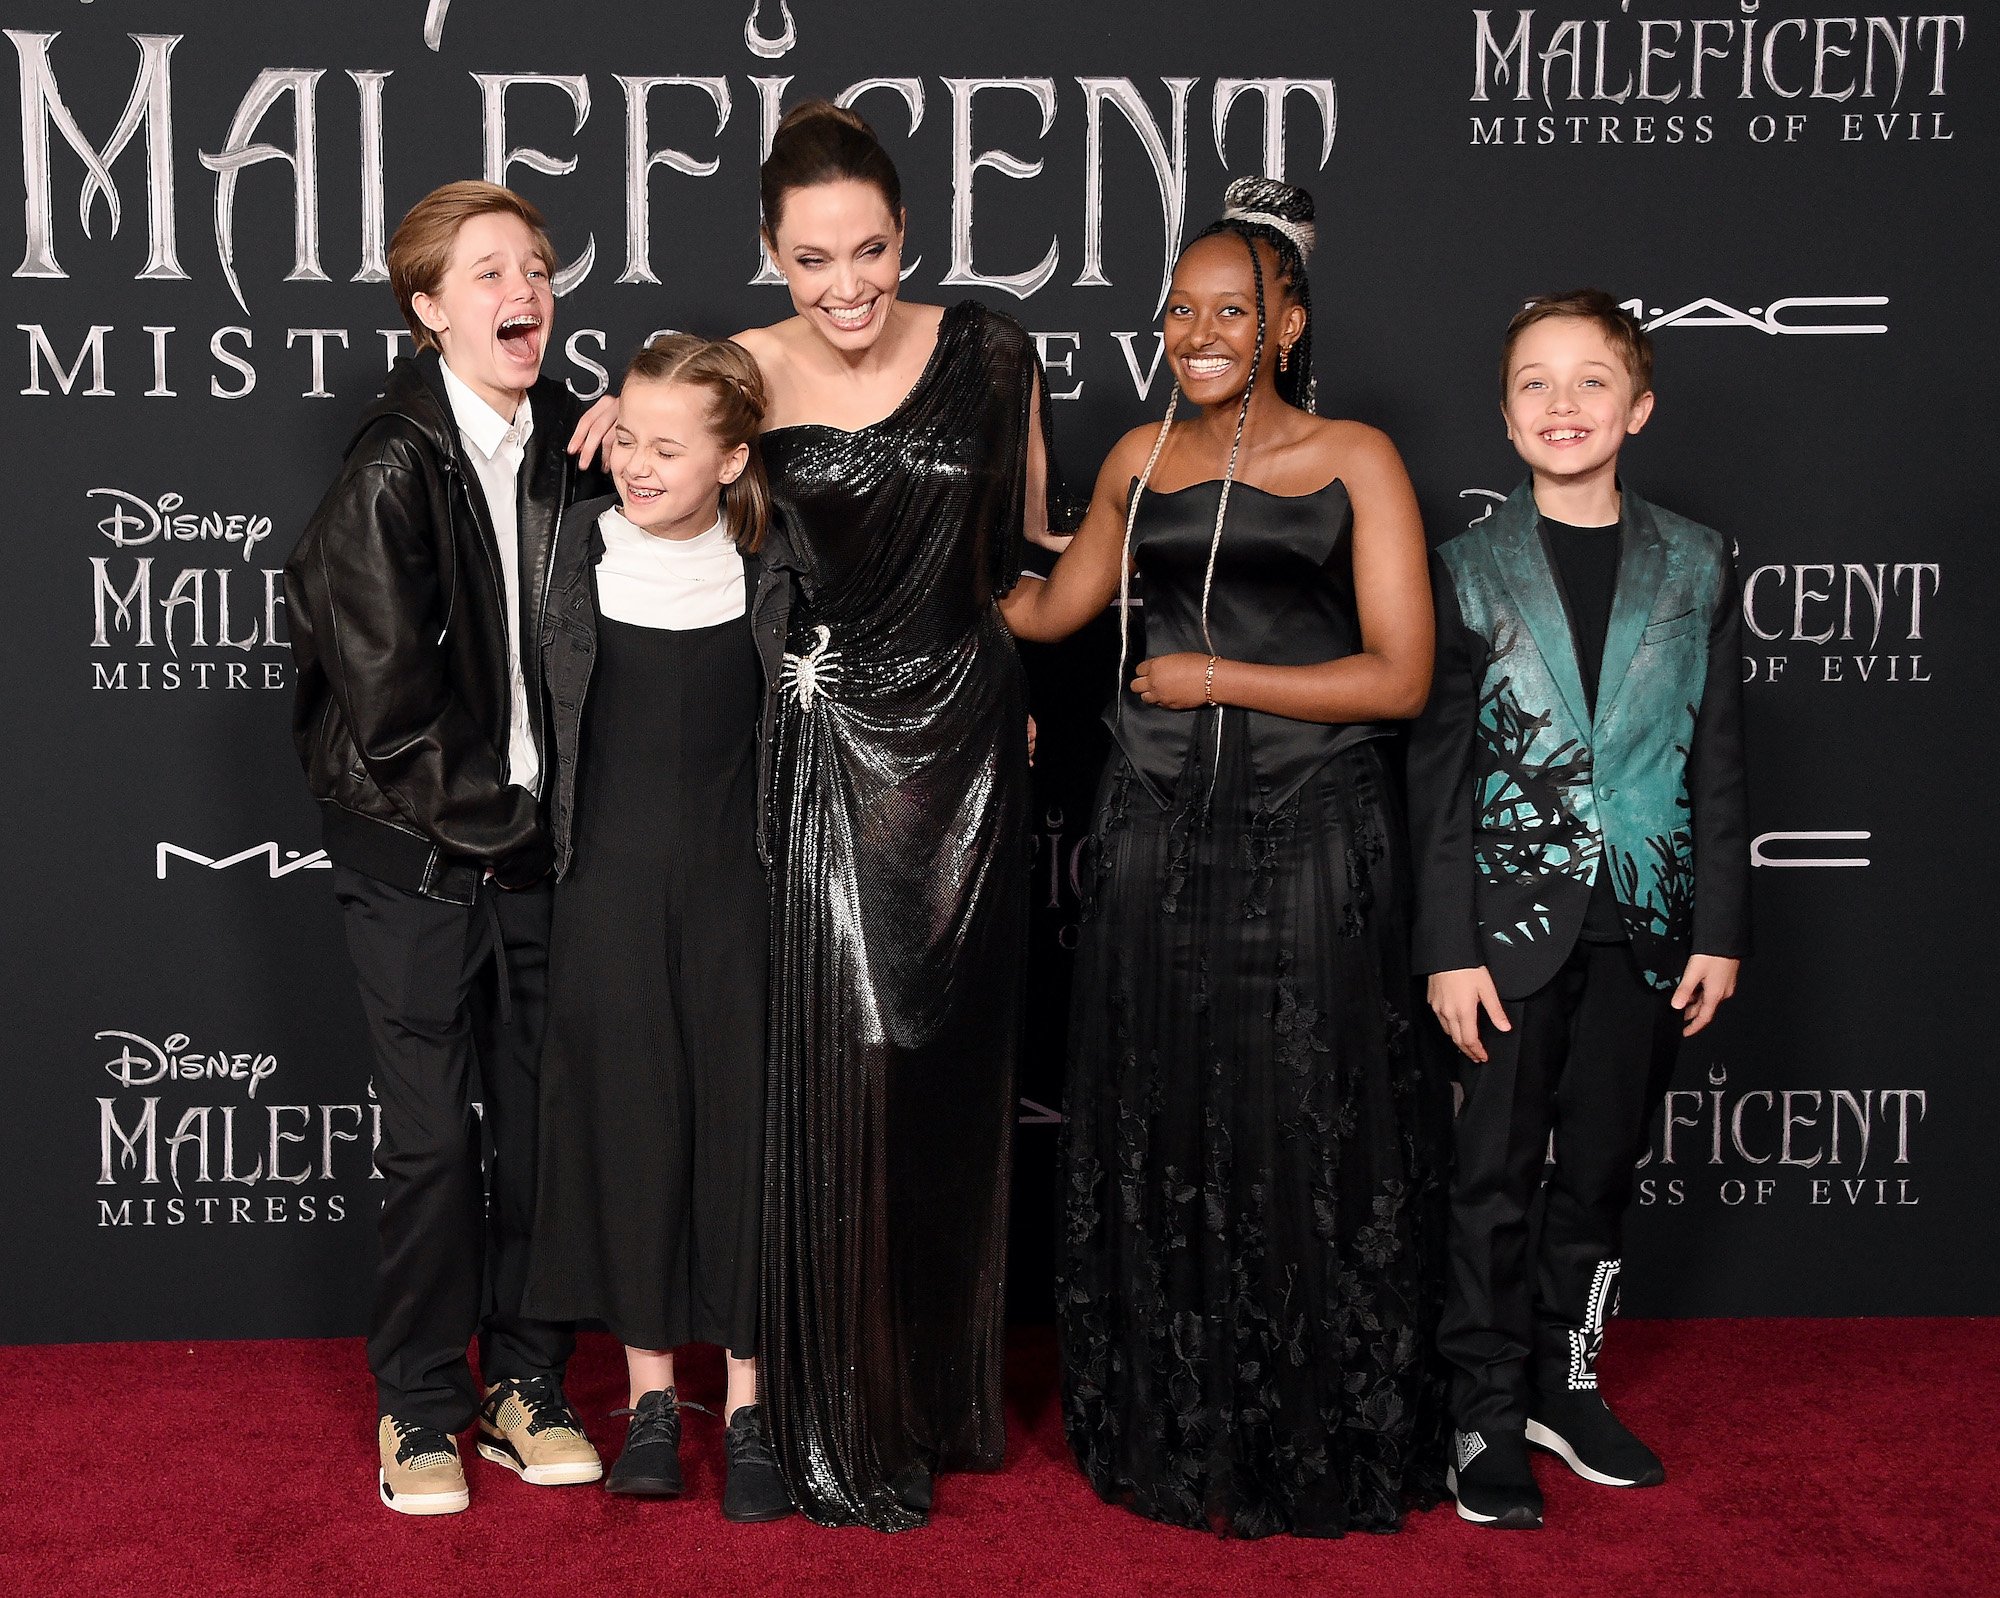 Angelina Jolie laughing with her kids in front of a black background on the red carpet